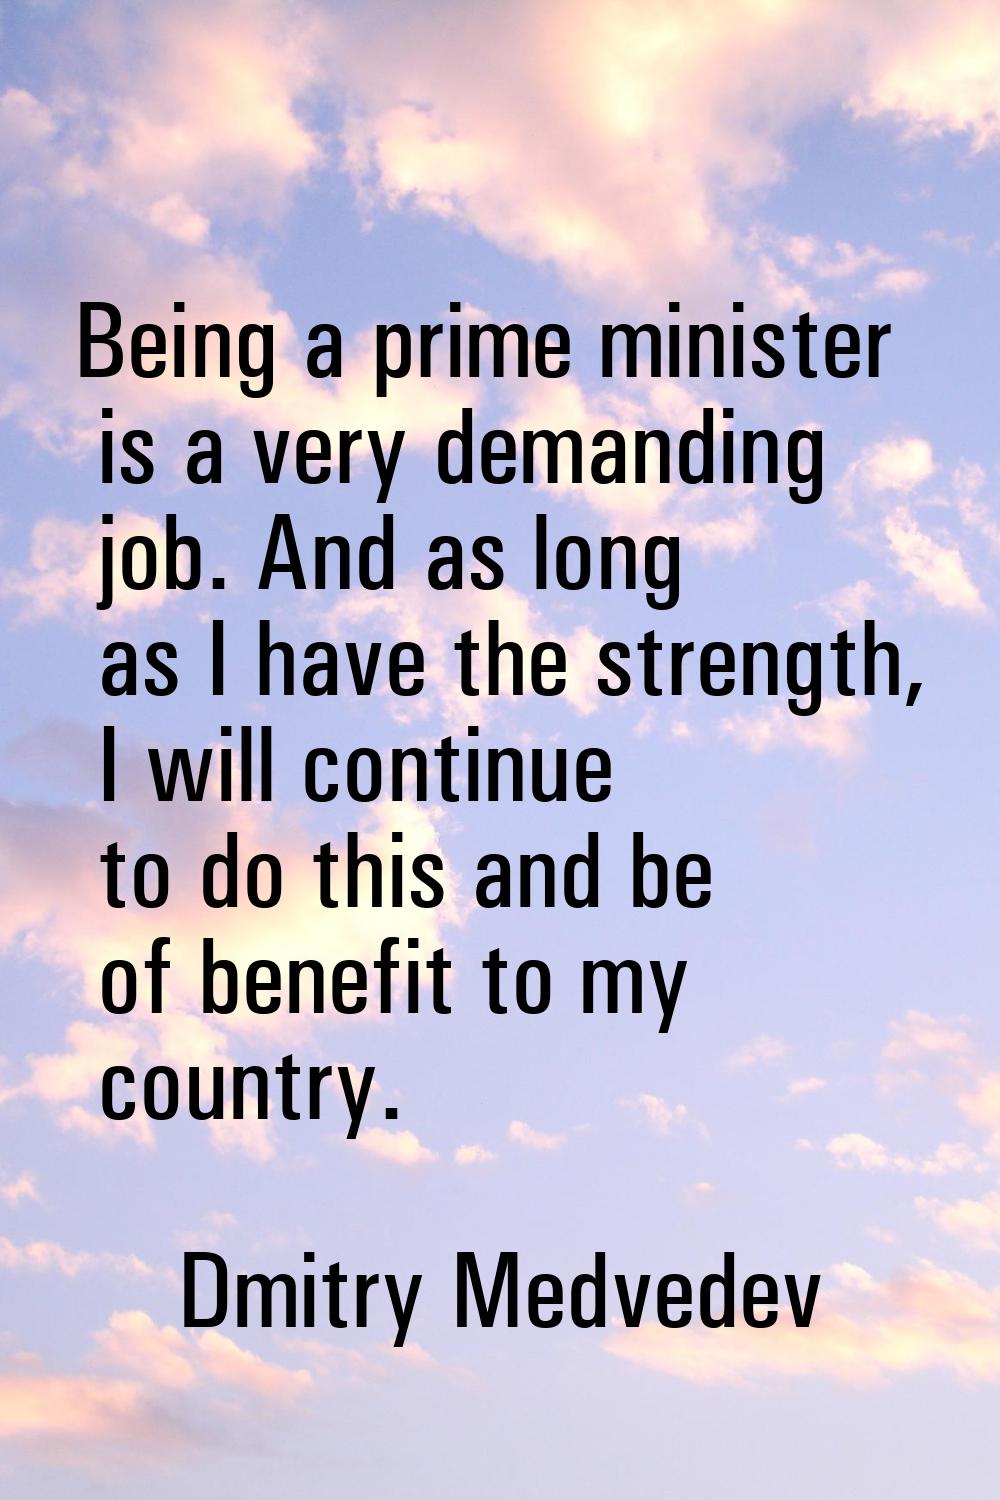 Being a prime minister is a very demanding job. And as long as I have the strength, I will continue